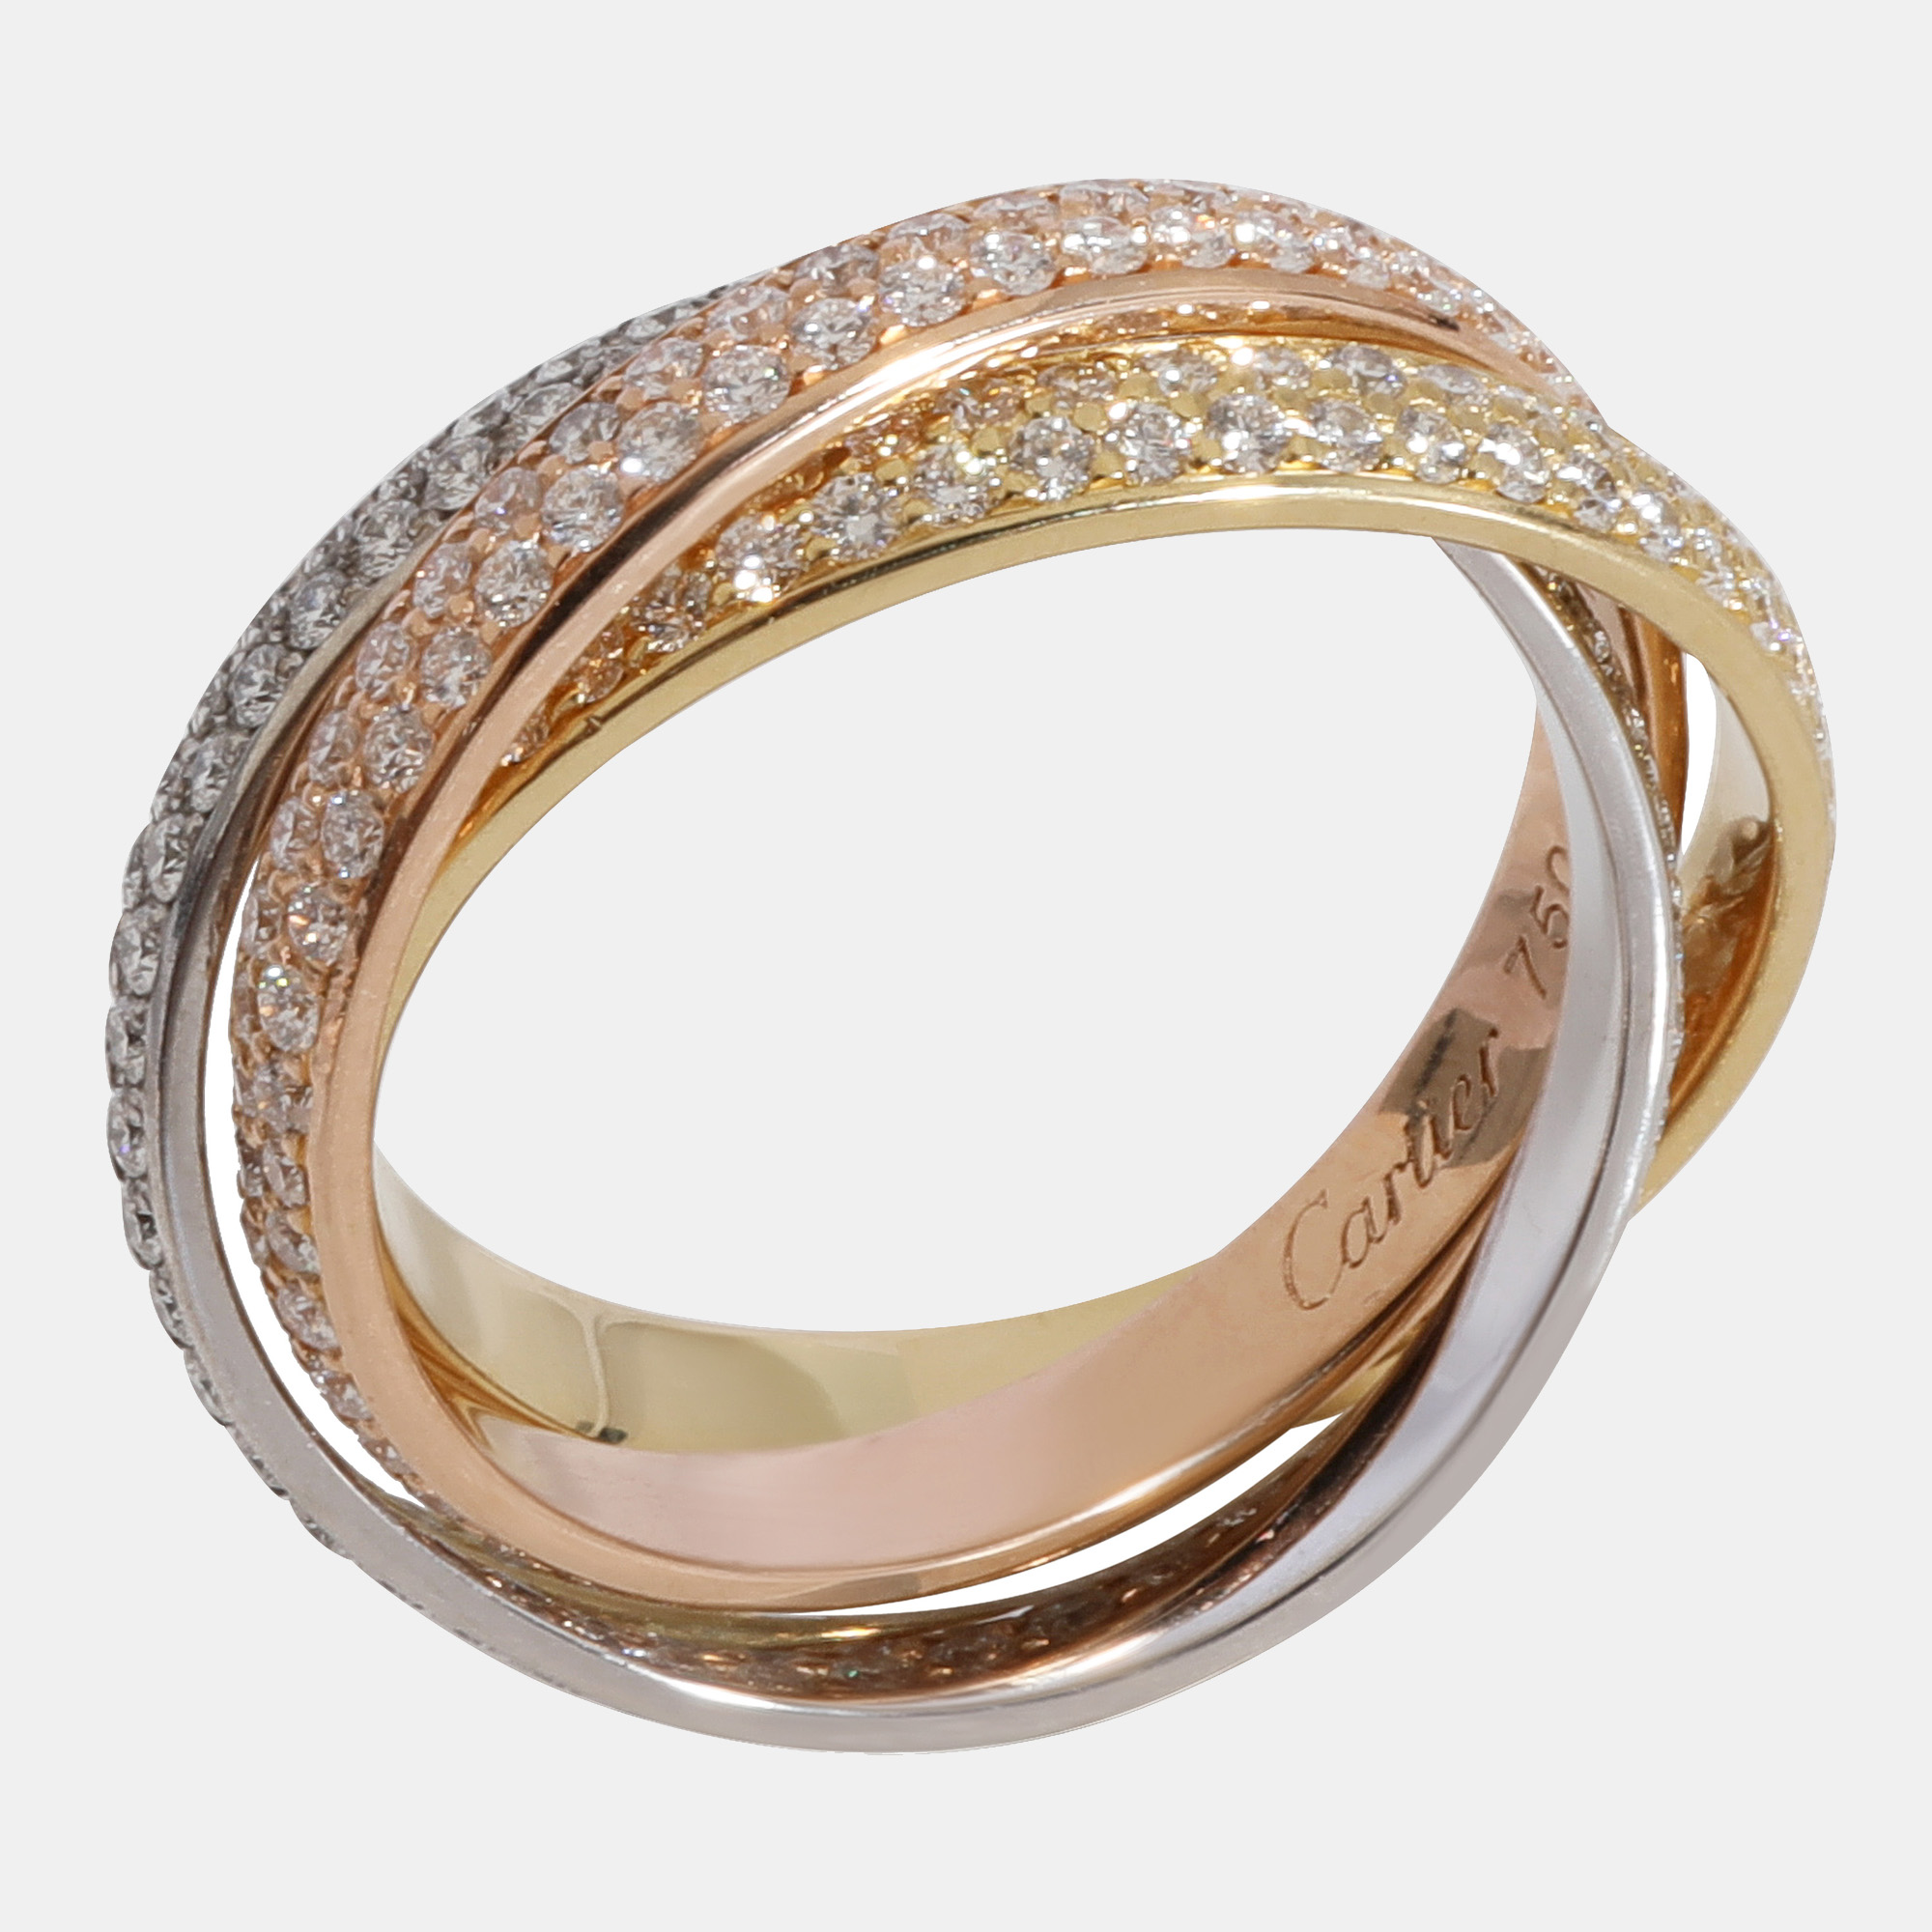 Cartier Trinity Diamond Band In 18K 3 Tone Gold 1.35 CTW Ring US 6